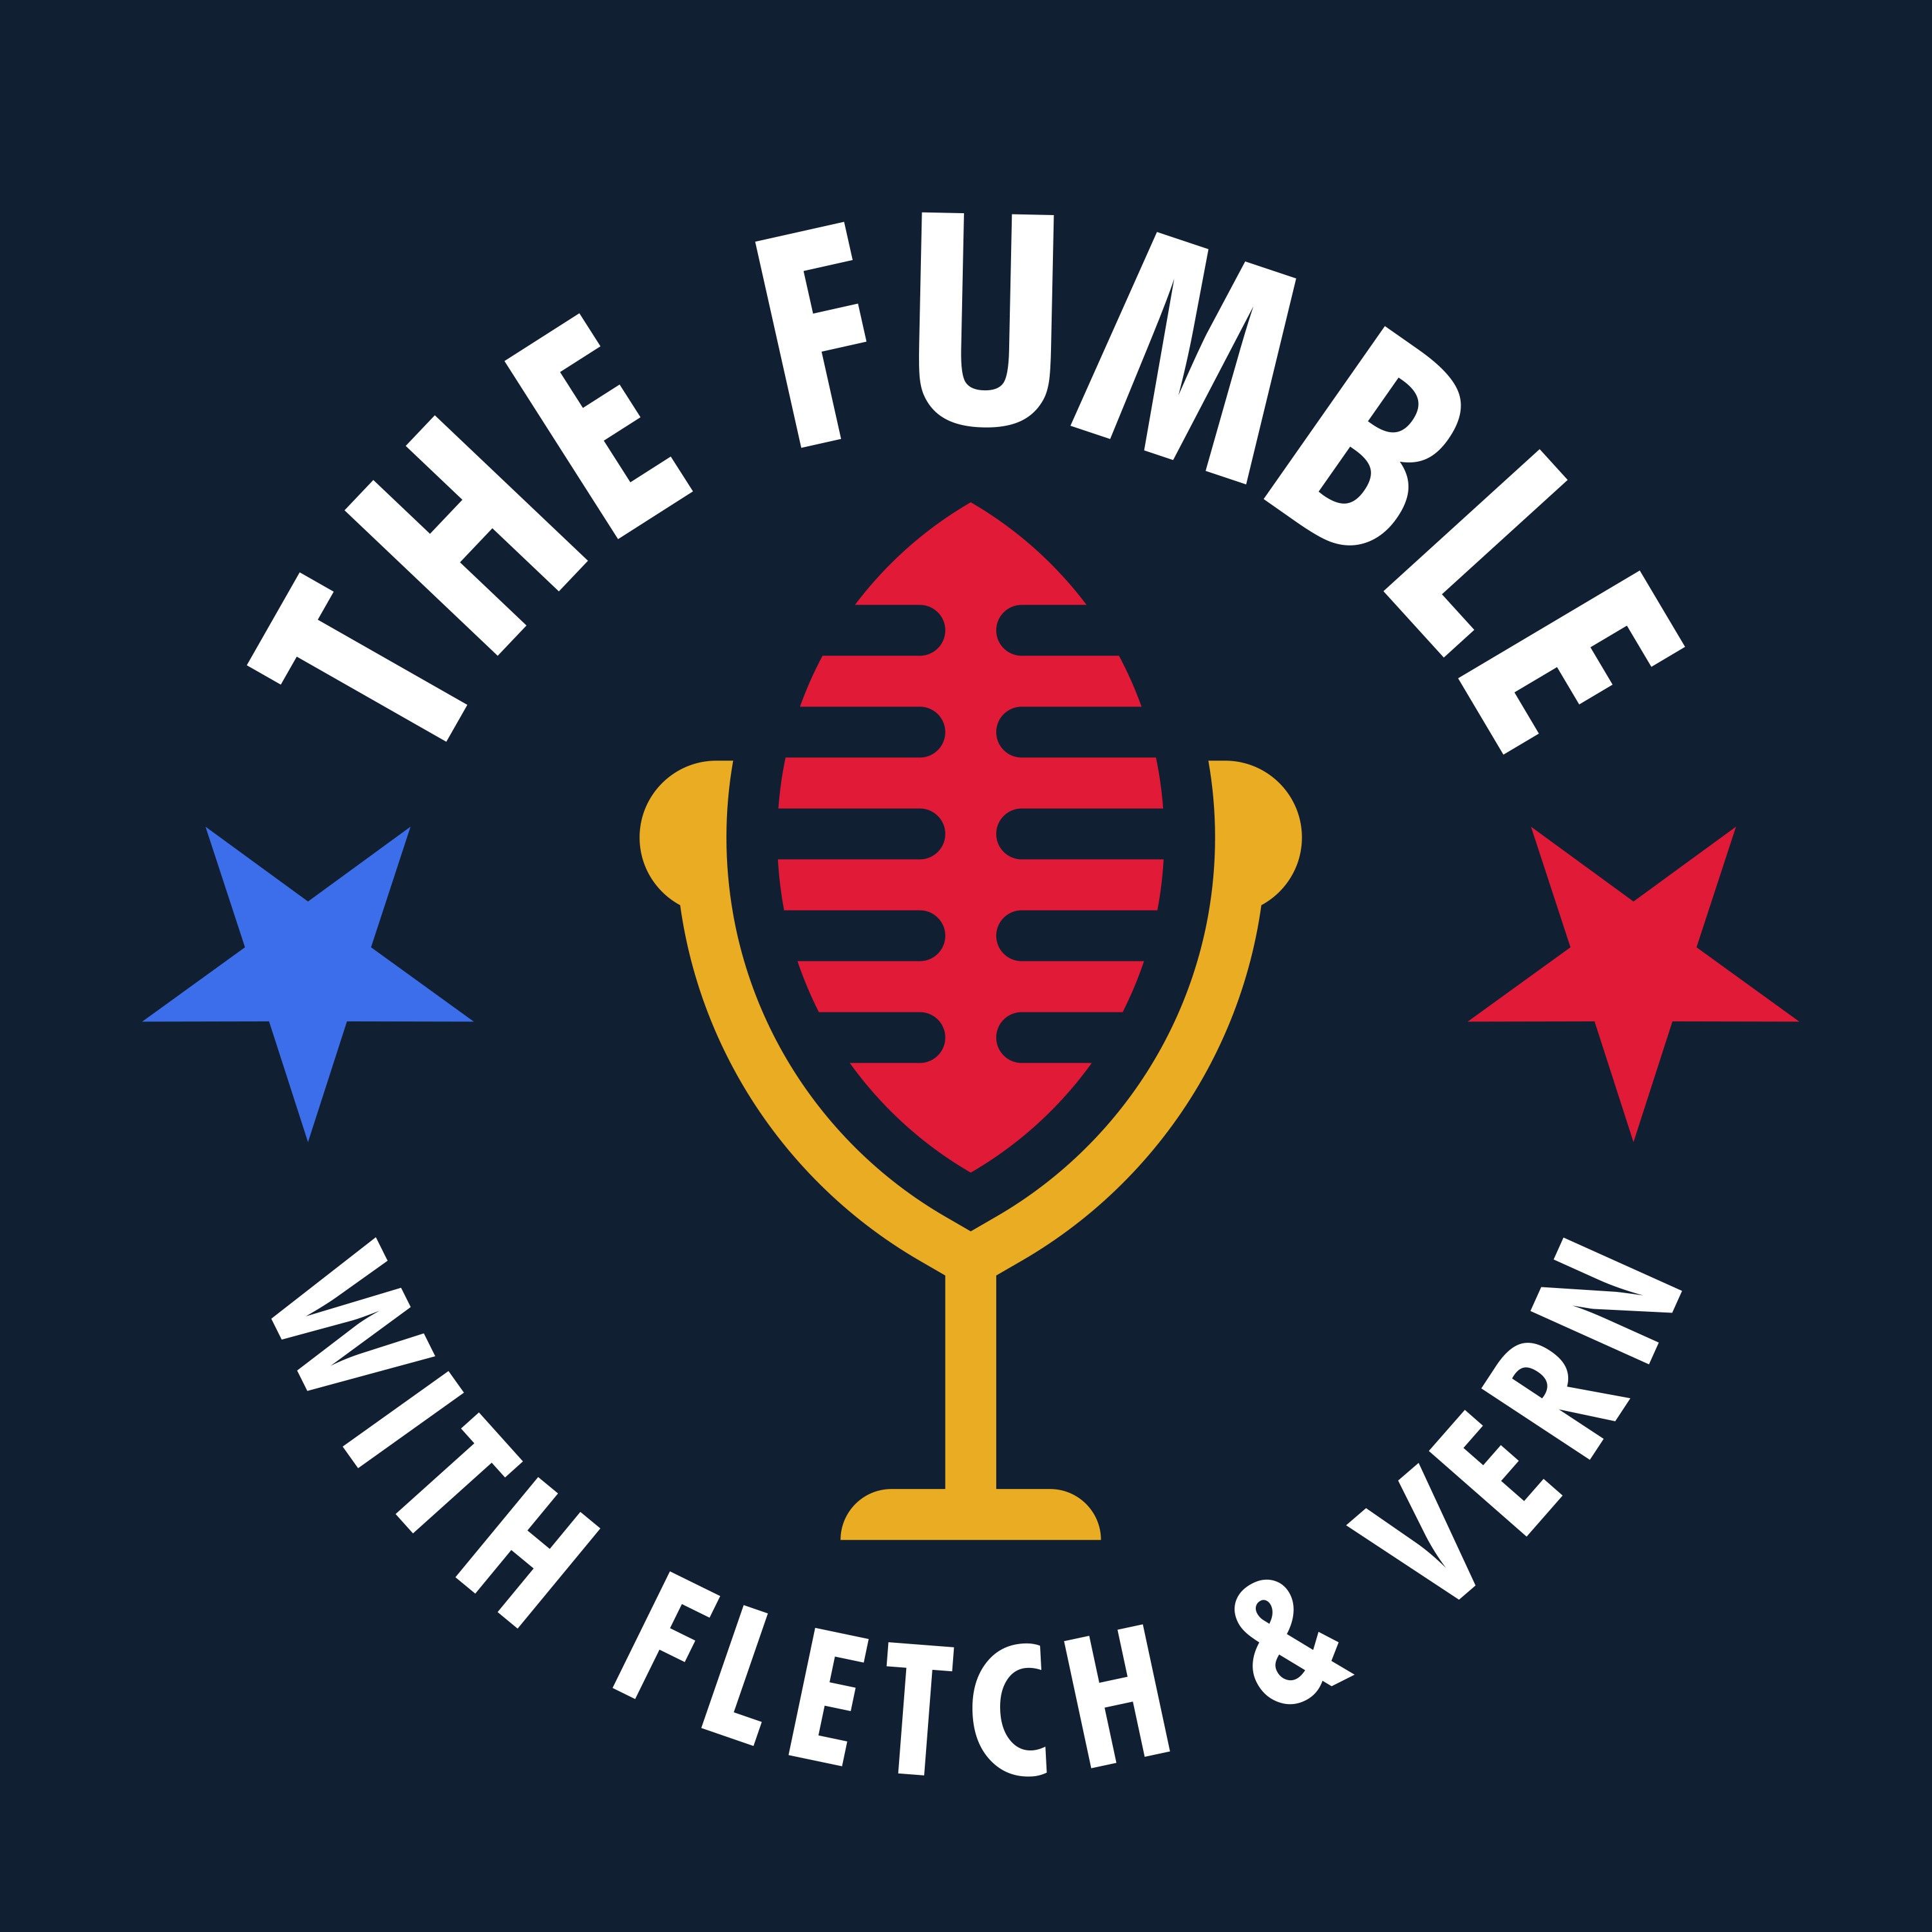 THE FUMBLE with FLETCH & VERN S3E8 WE SOLVE VAR & FLETCH GOES TO LA